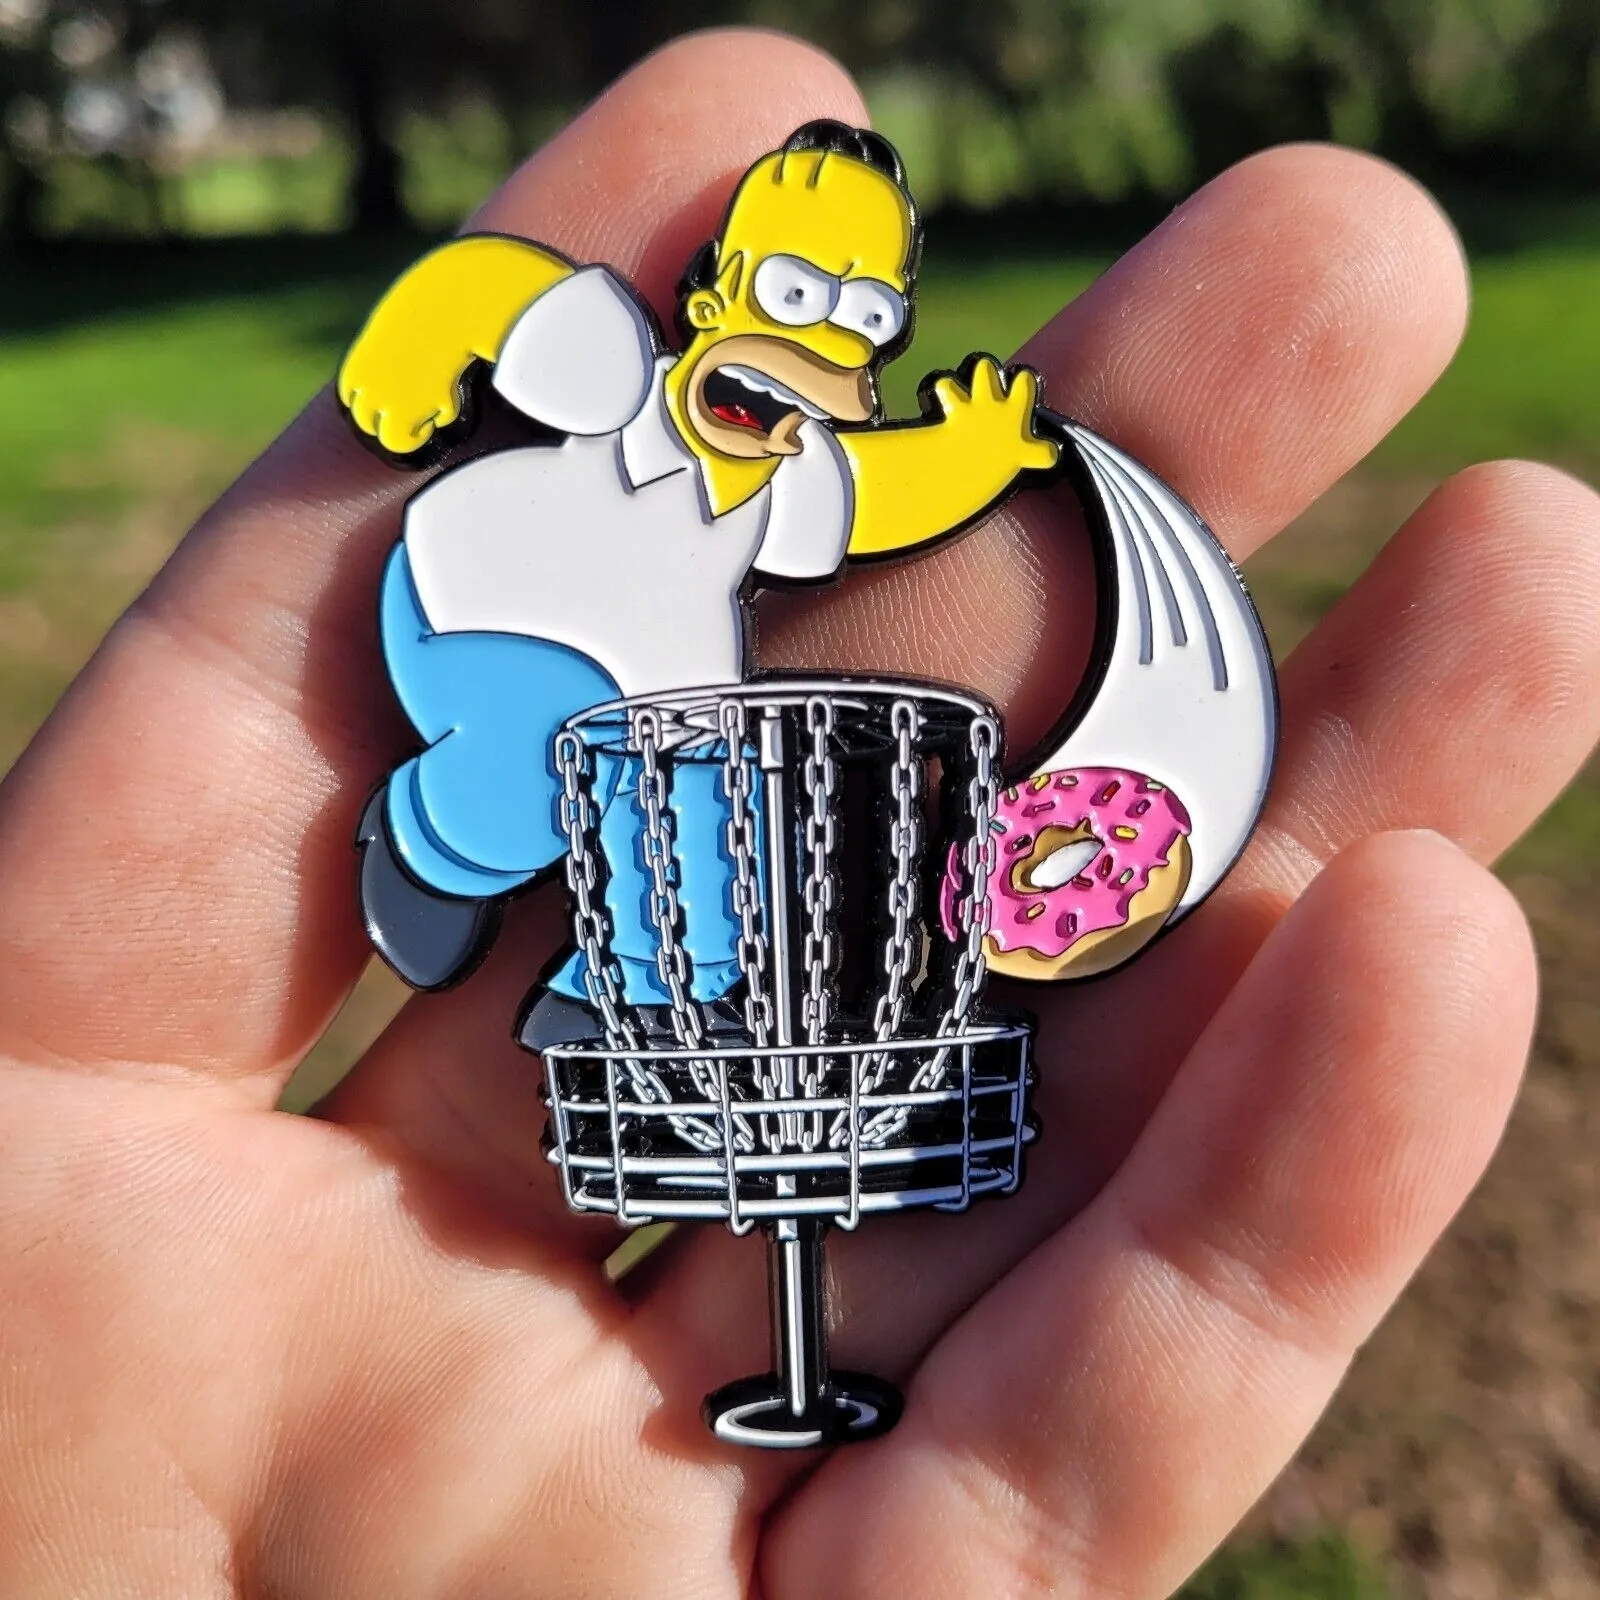 A person holding a frisbee with a simpsons character on it.